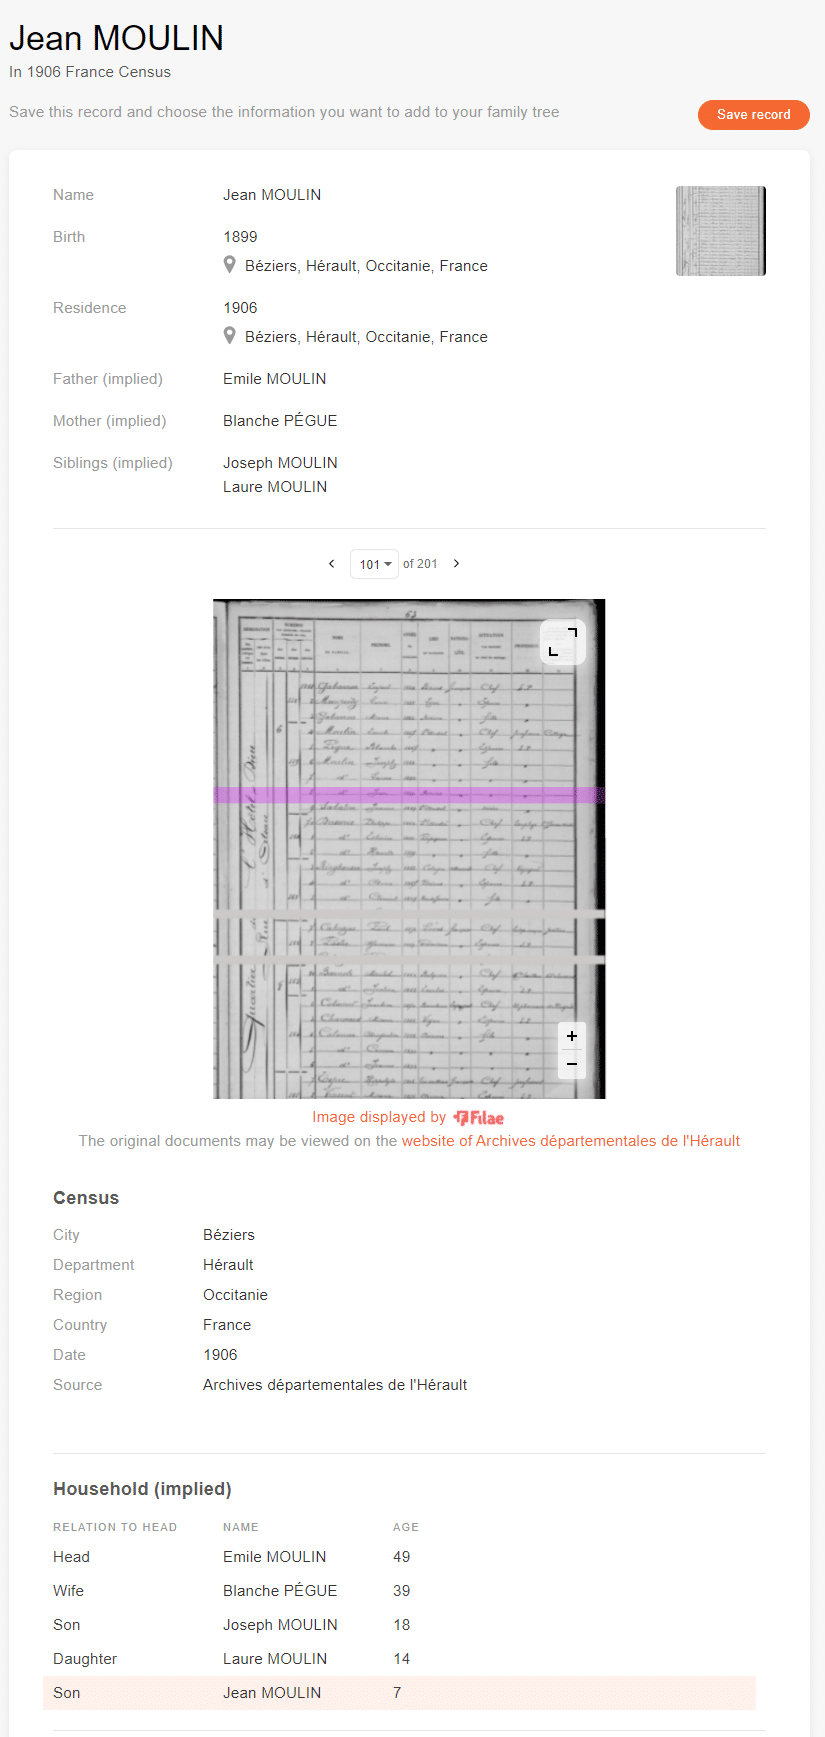 Census record of Jean Moulin [Credit: MyHeritage 1906 France Census]